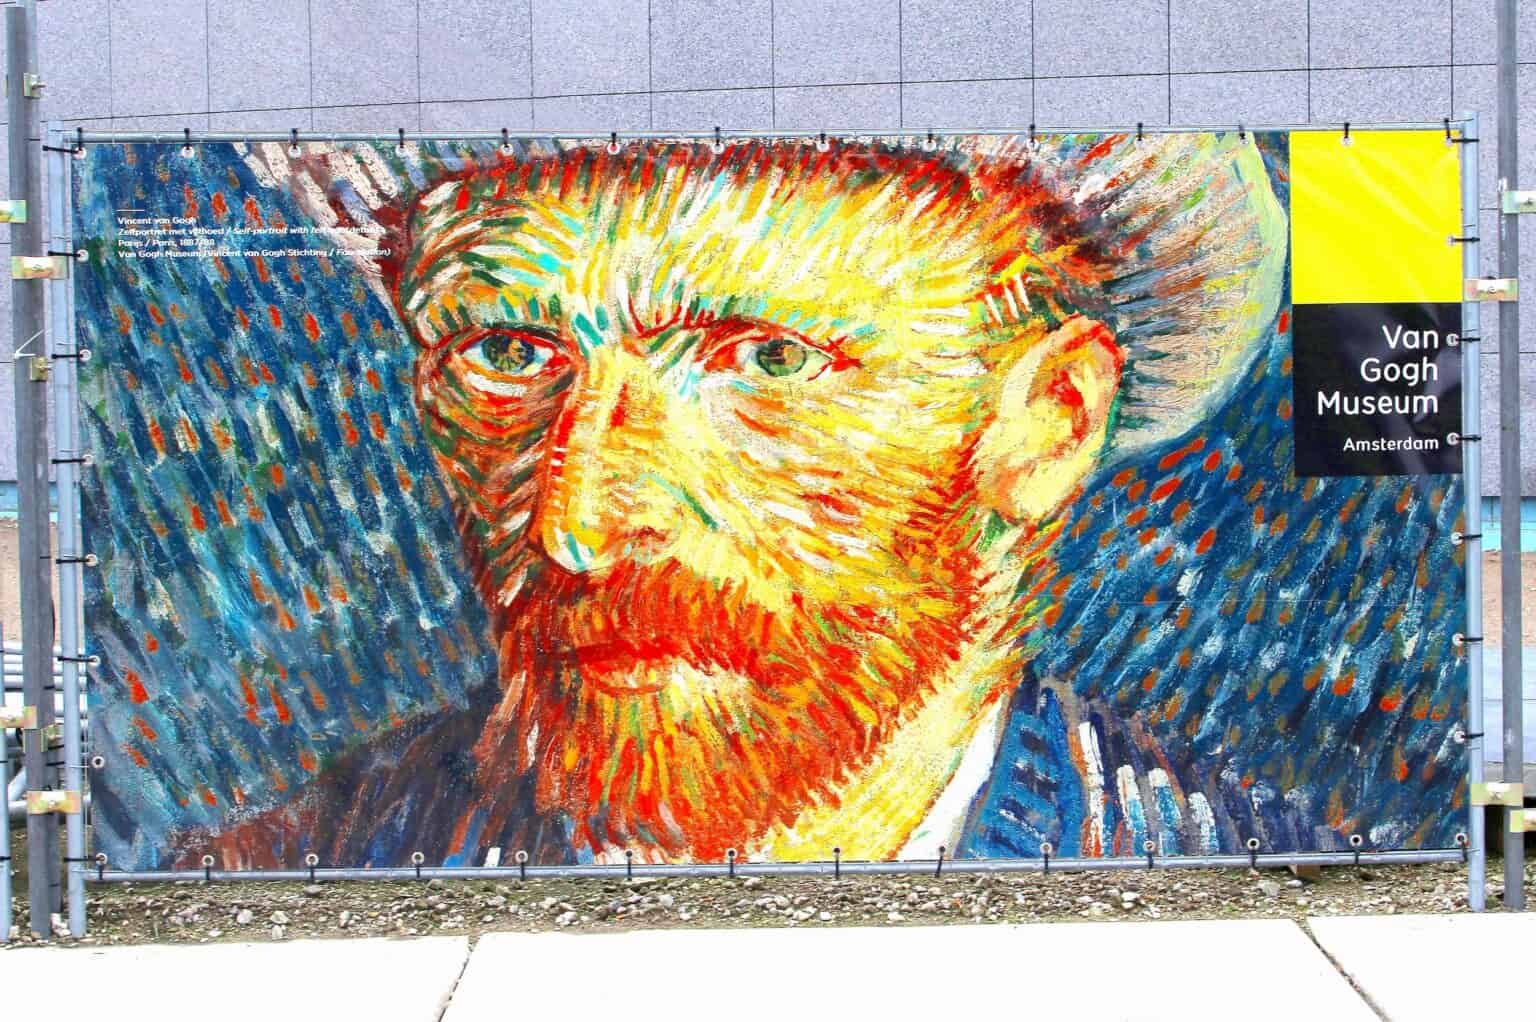 How Many Paintings Did Van Gogh Sell While Alive Wilson Surne